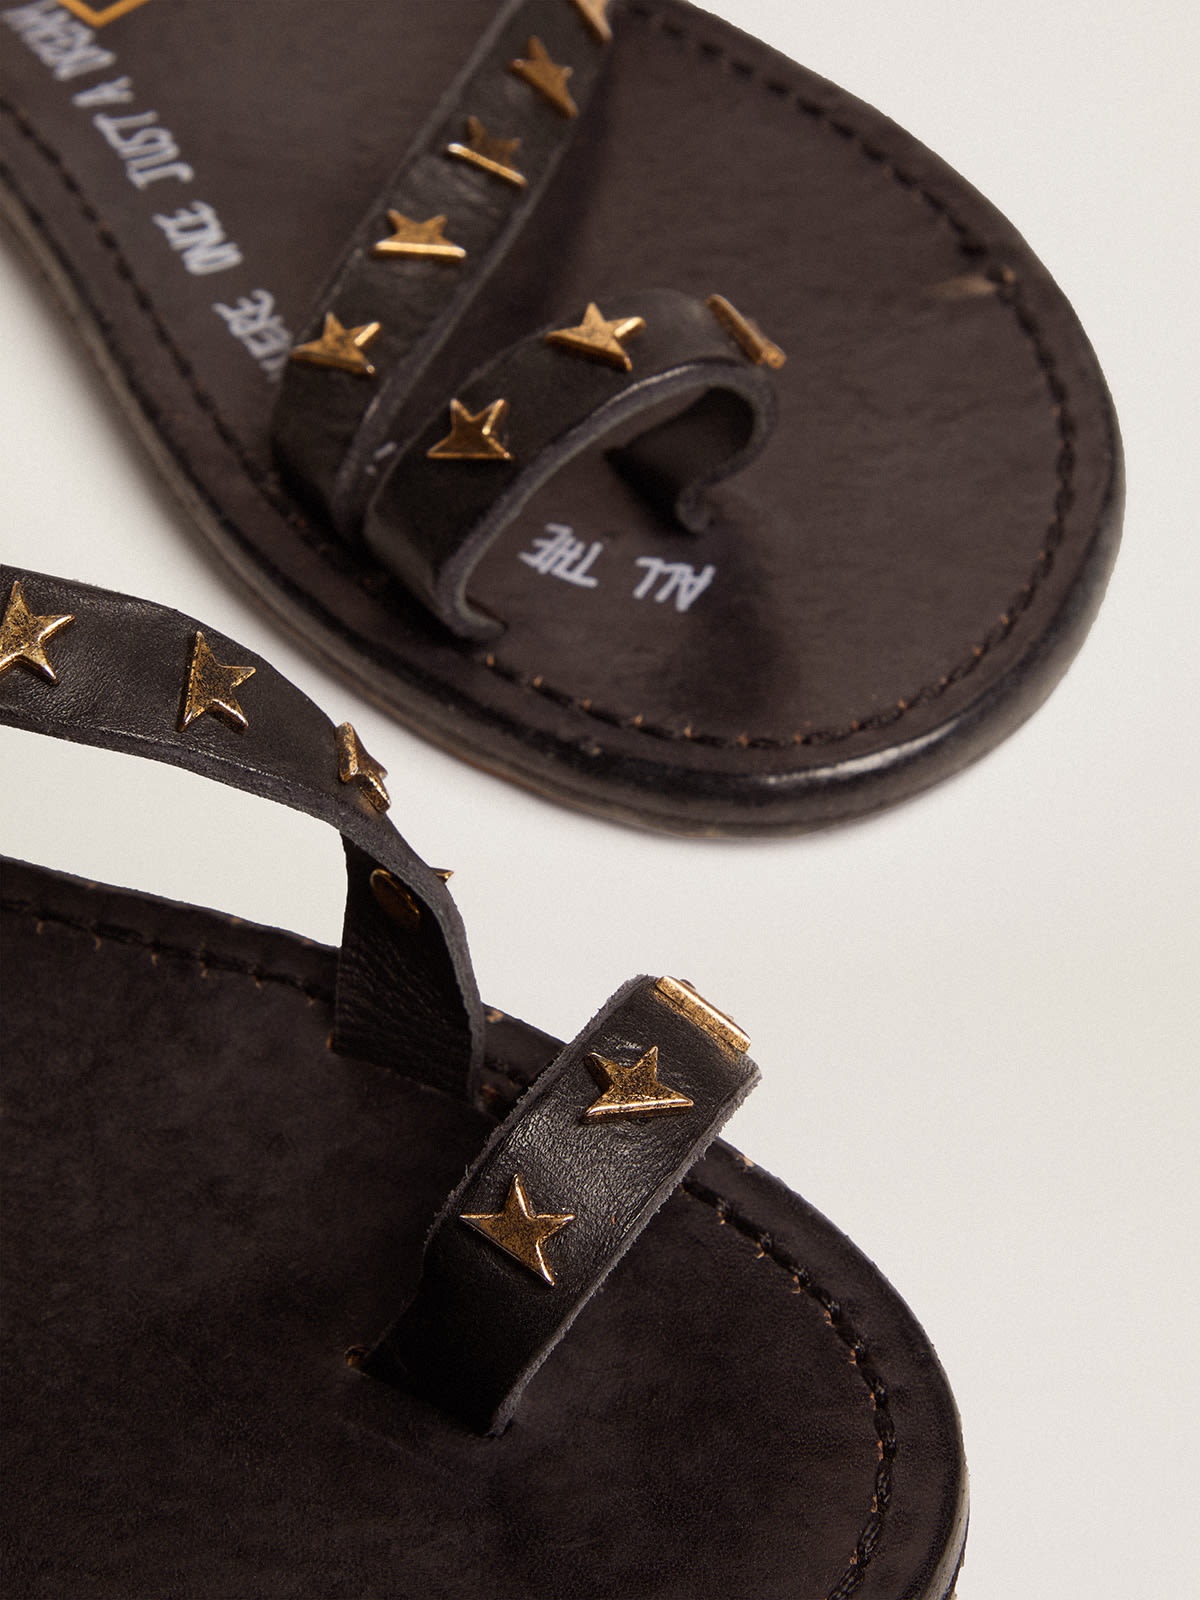 Women's flat sandals in black leather with gold stars - 5